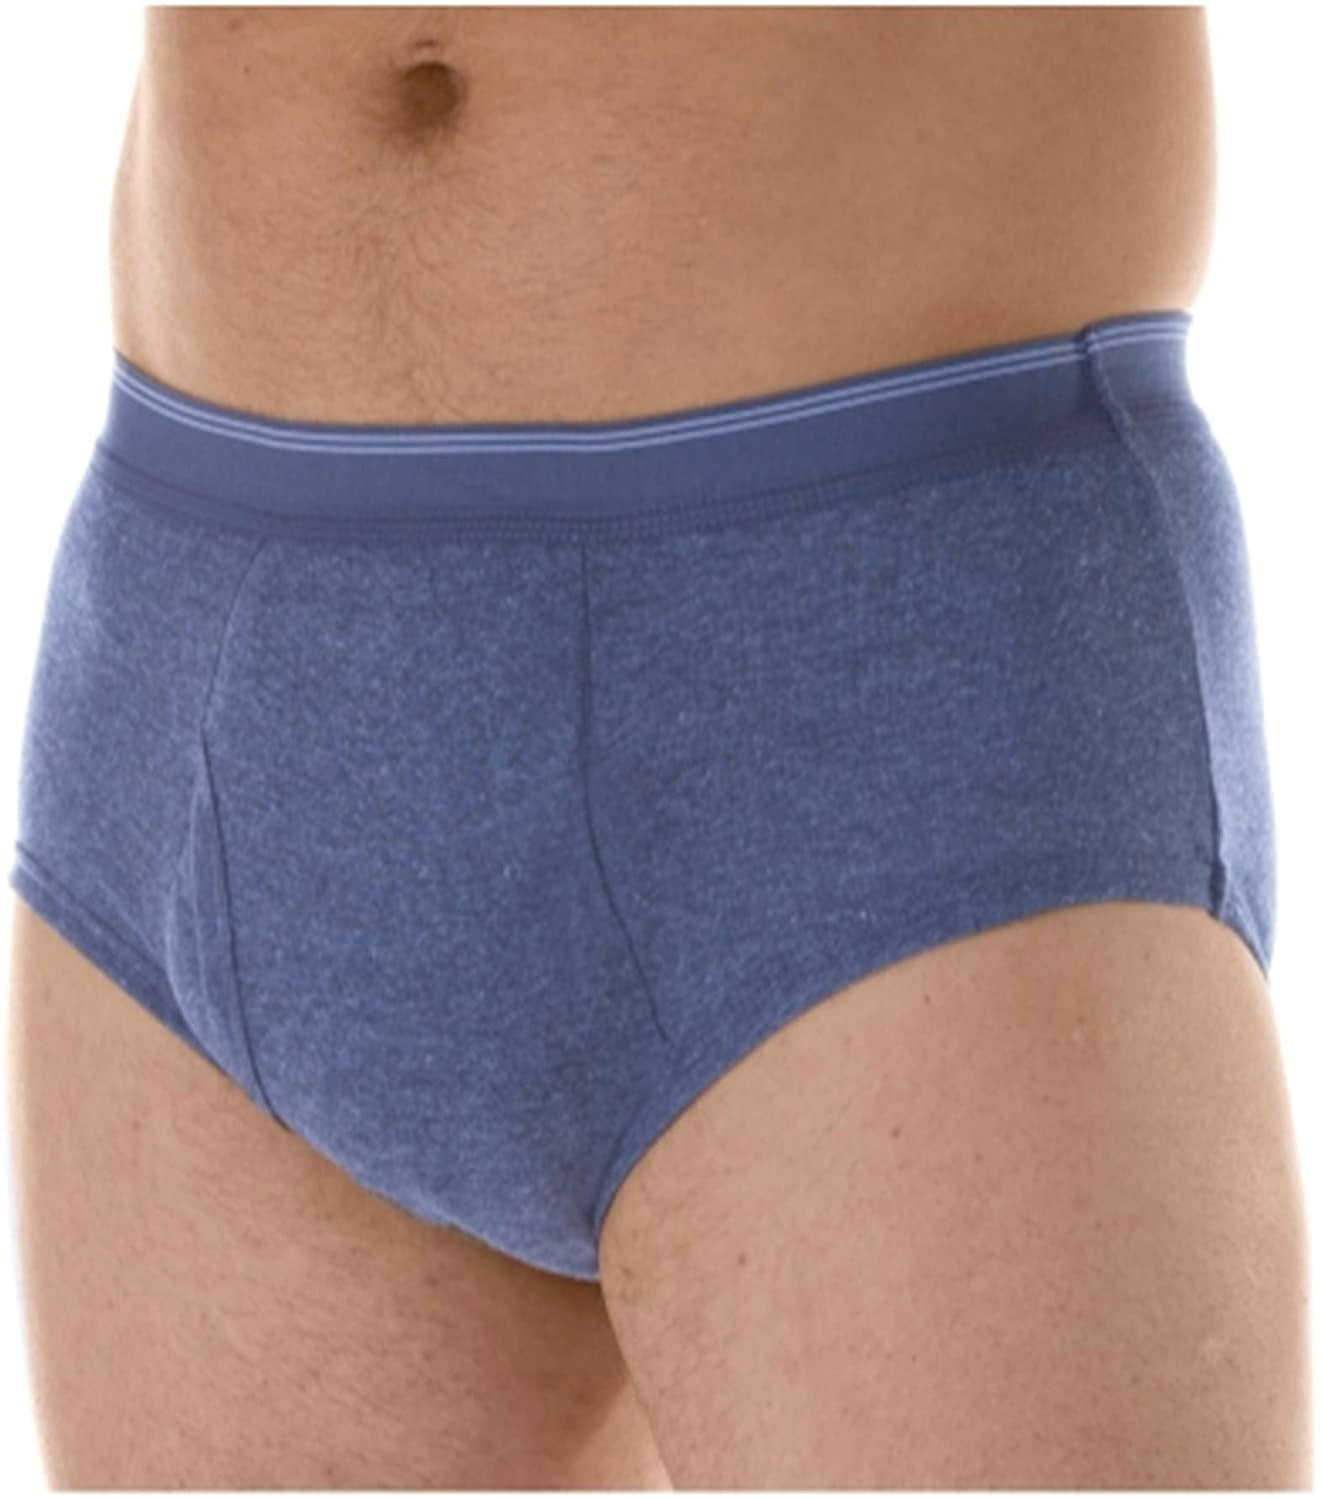 3 pk men's reusable incontinence briefs pictured on person. washable underwear for heavy incontinence from AskSAMIE